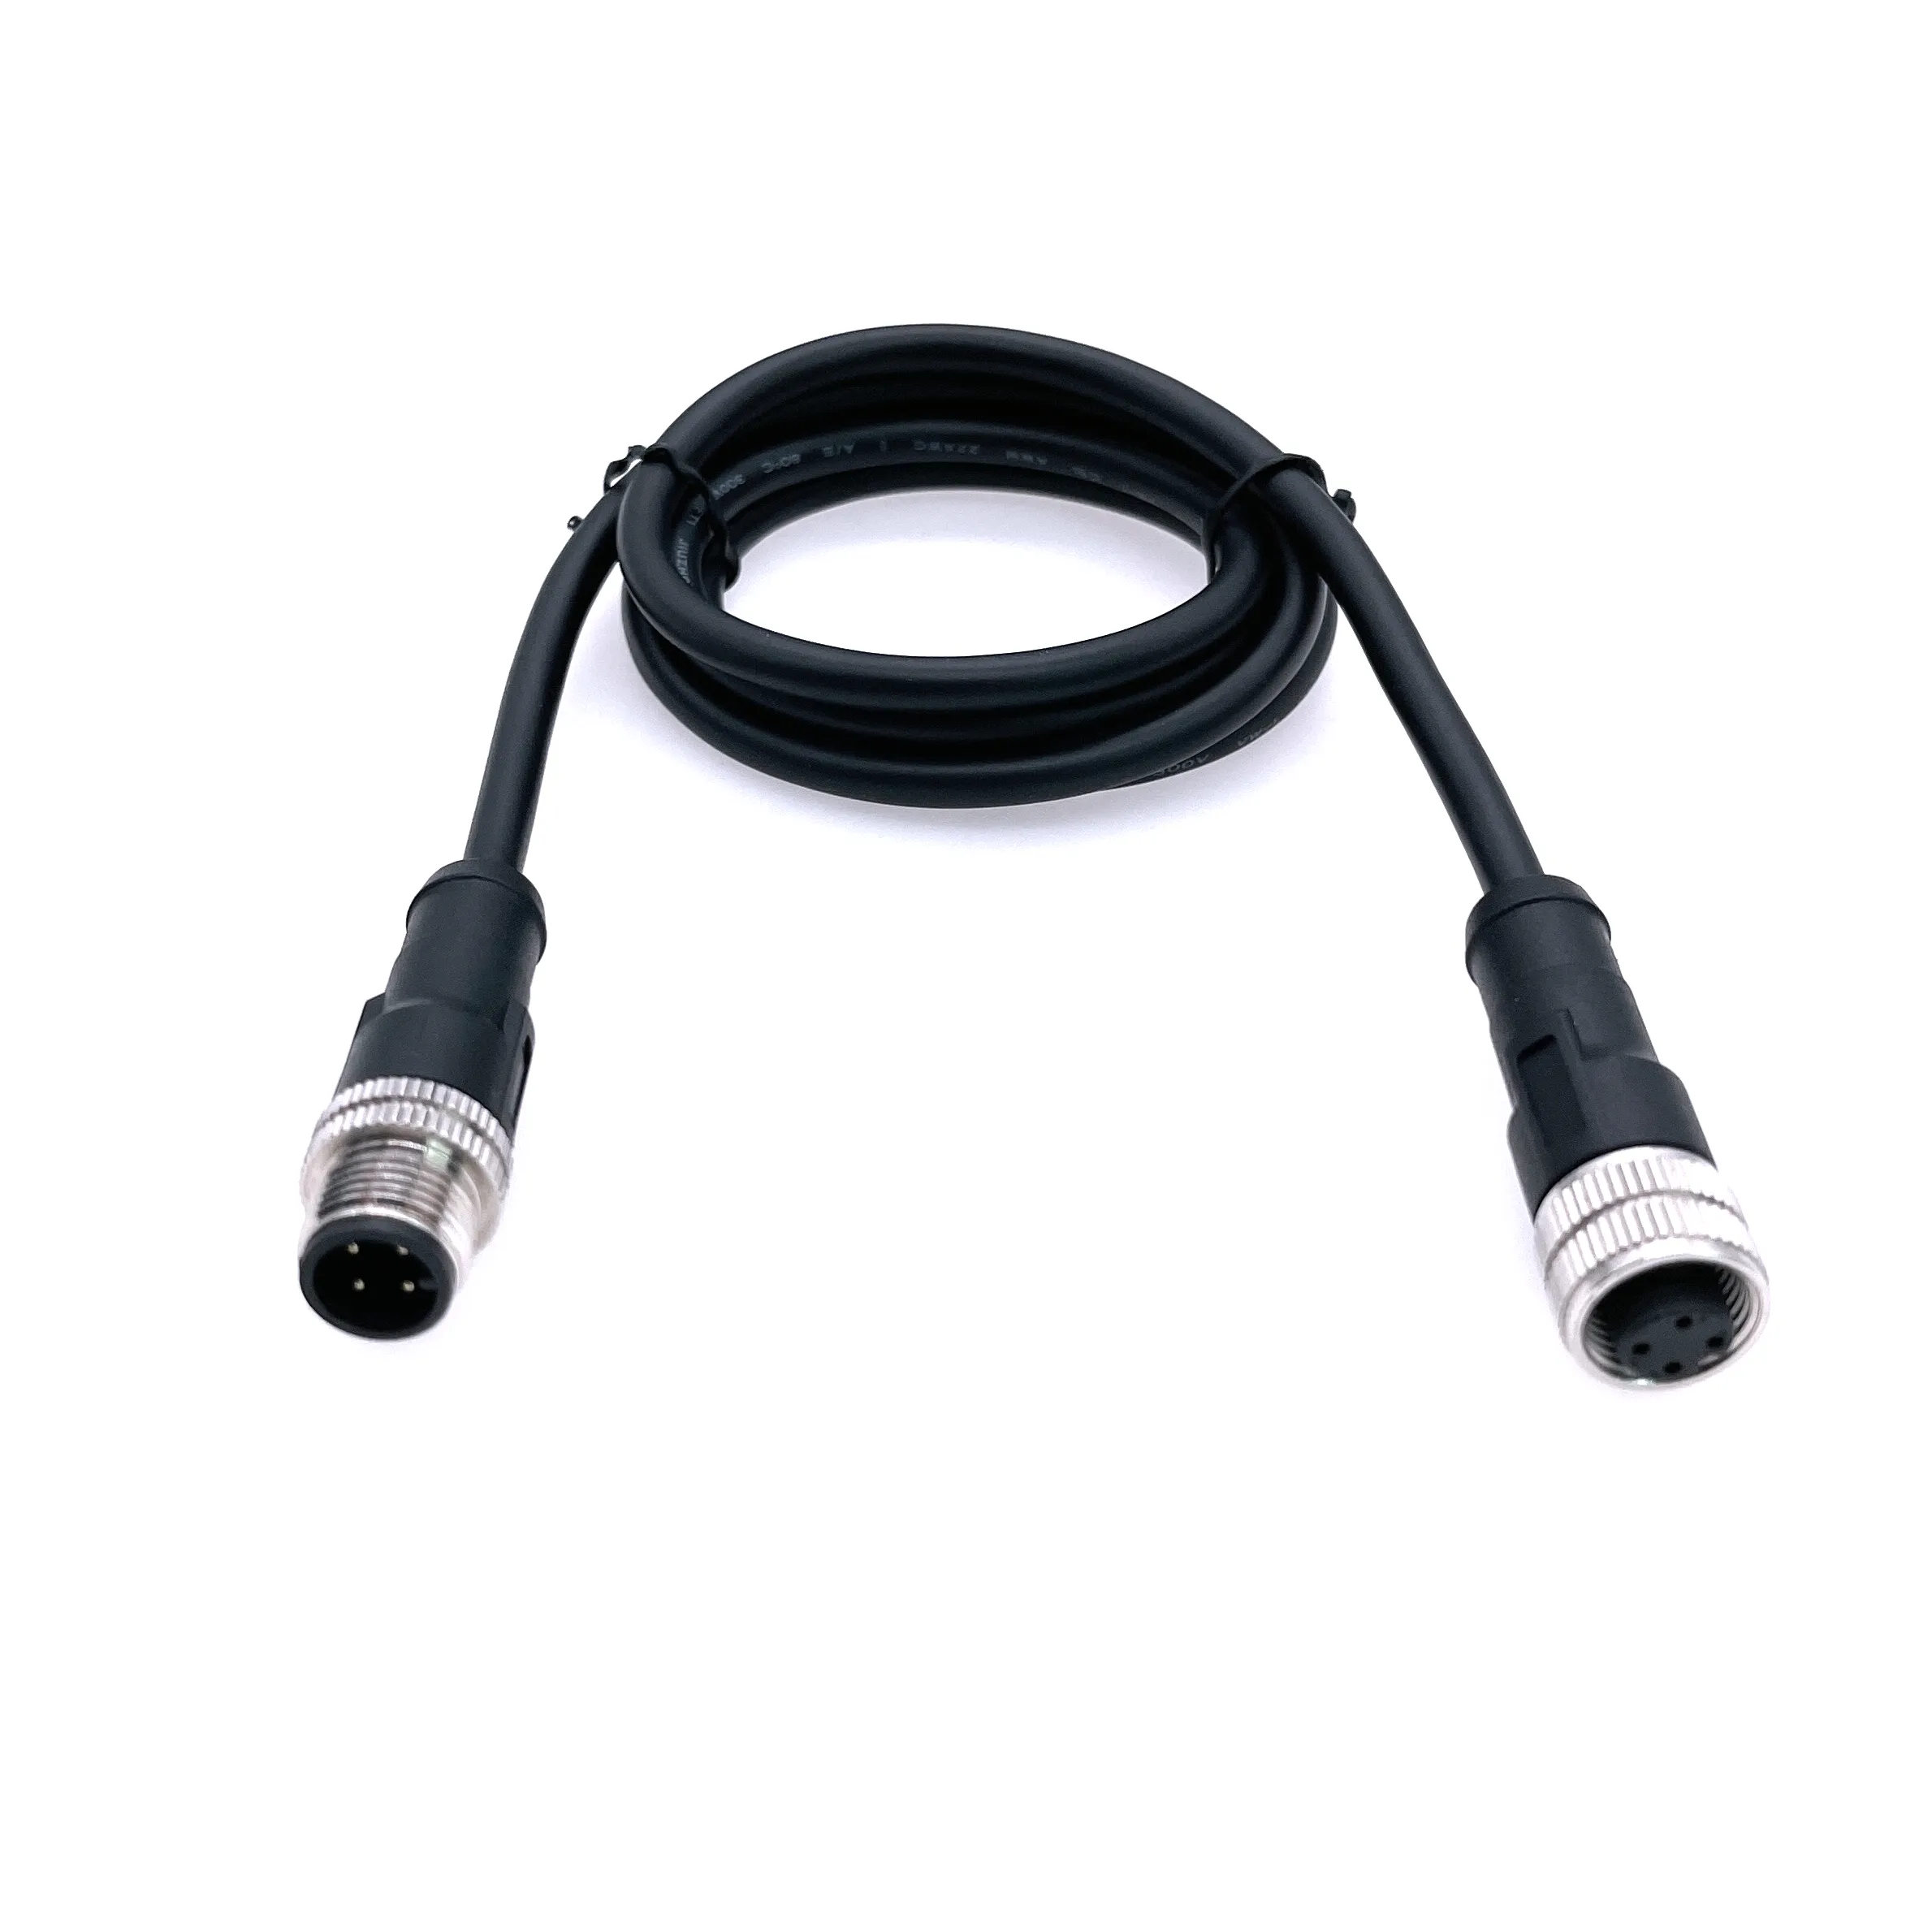 M12 female-to-male cable extension, 4-pin shielded and (unshielded) circular waterproof connector to TPU oil-resistant and anti-